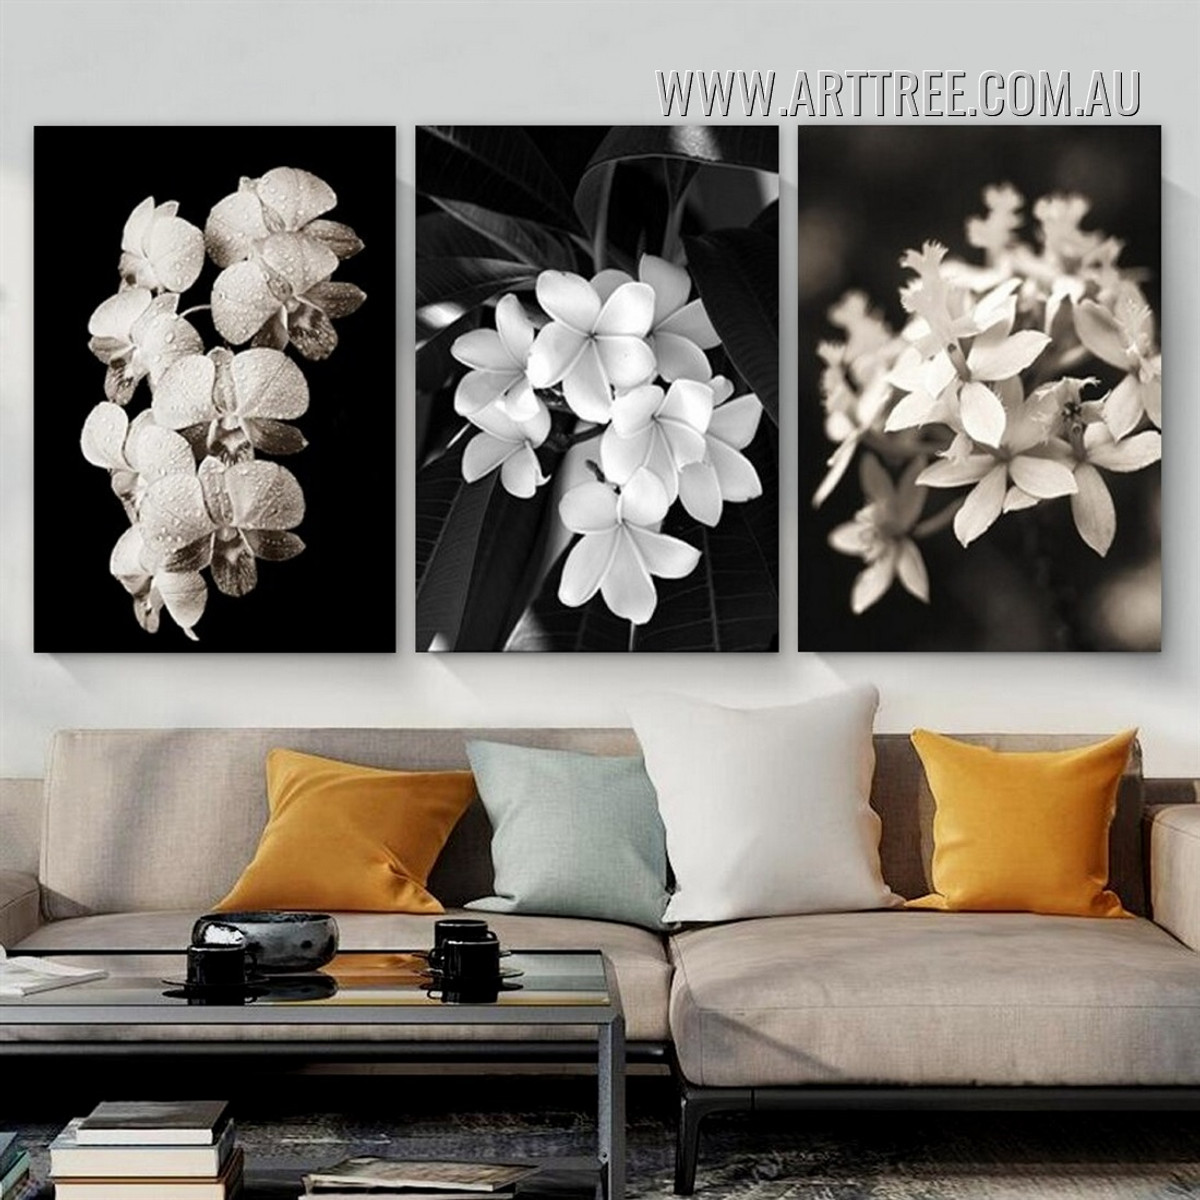 Plumeria Blooms Abstract Floral 3 Piece Framed Wall Art Modern Photograph Canvas Print for Room Molding